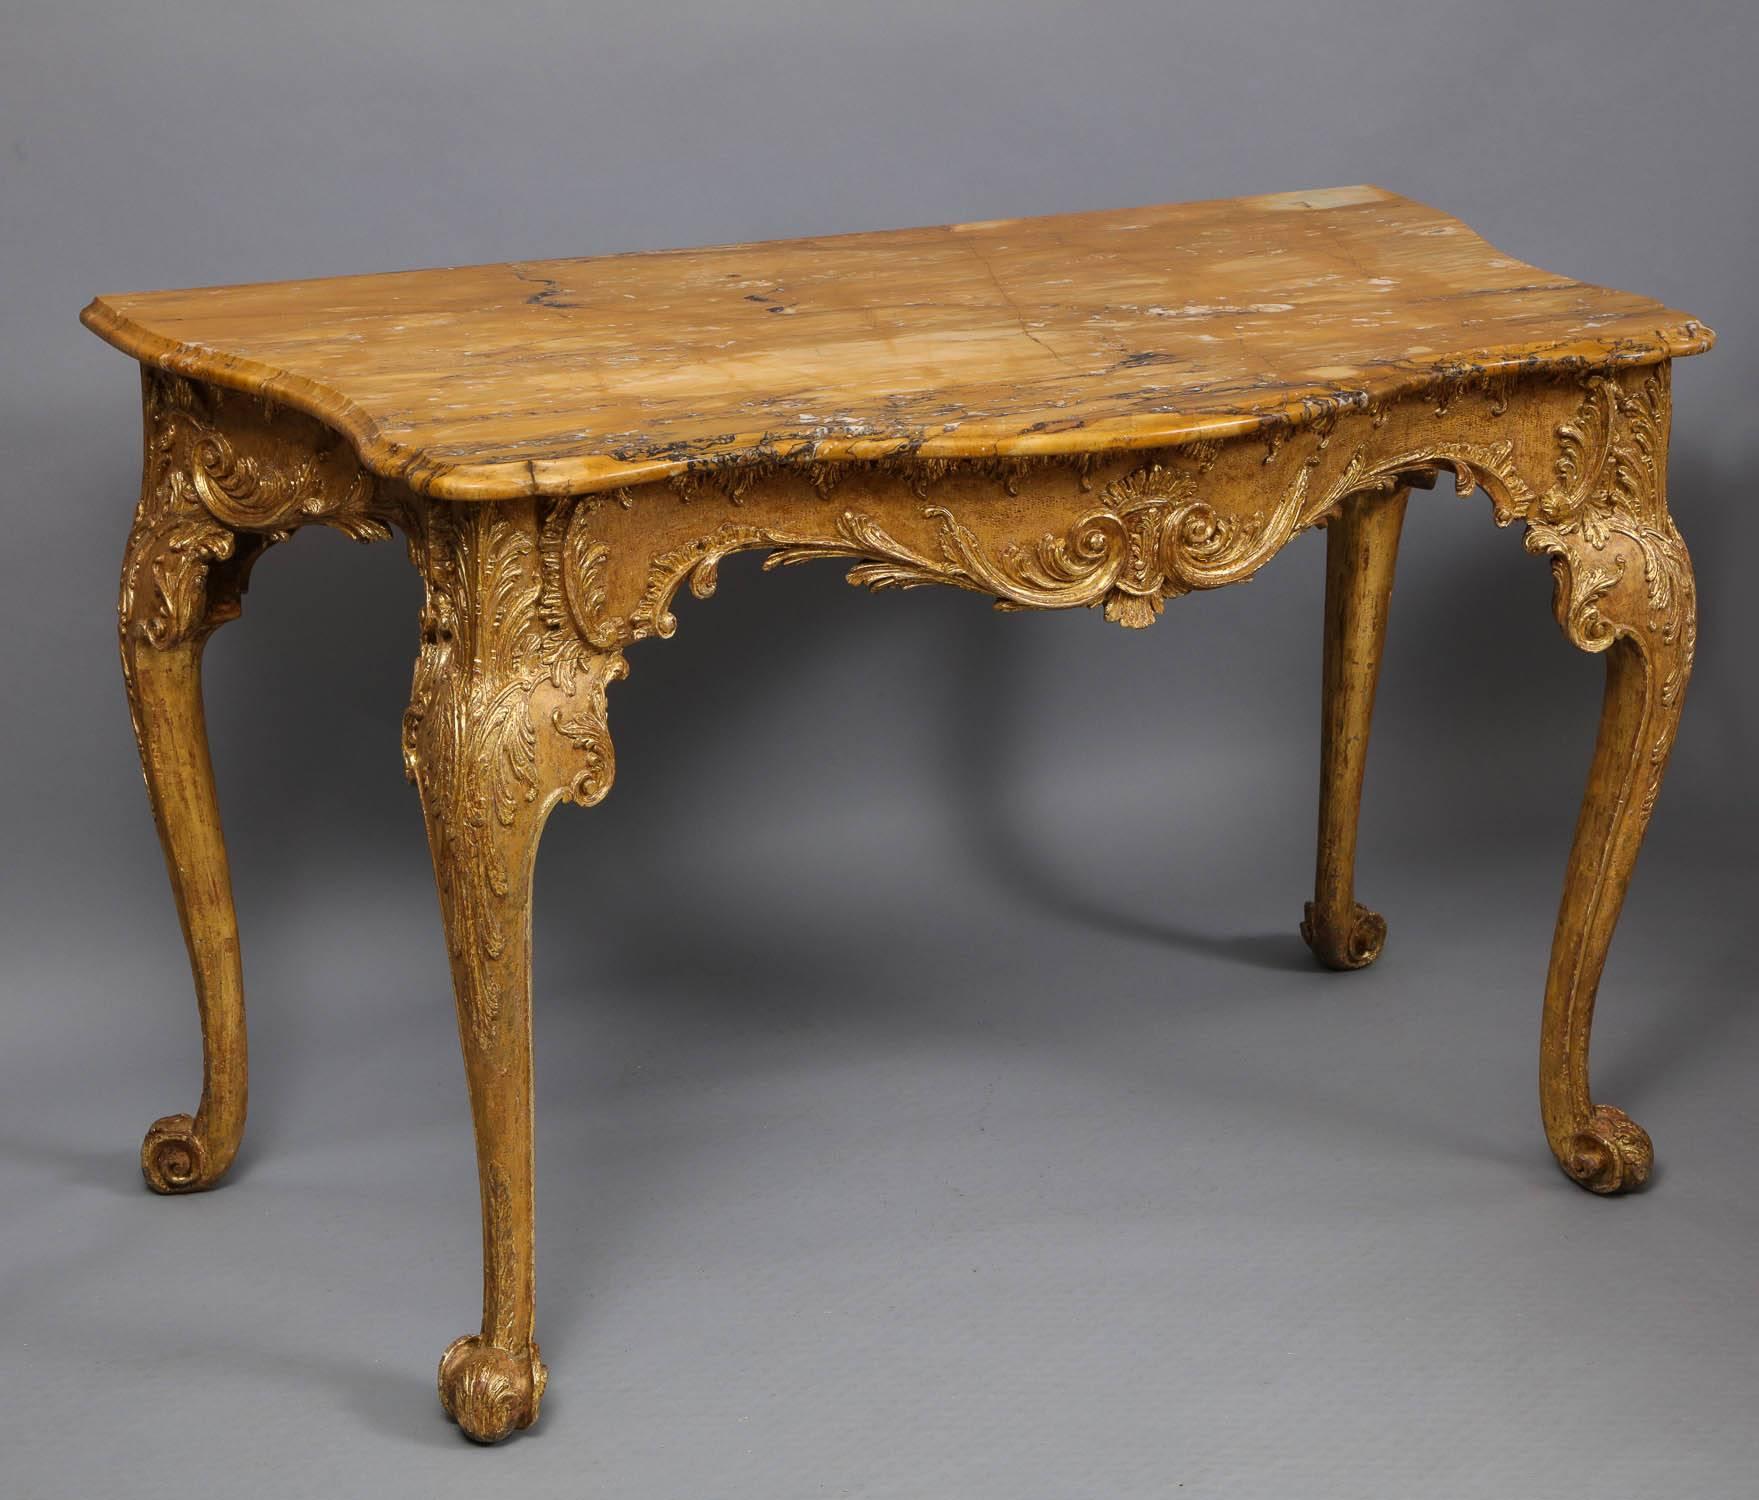 Fine 18th century Irish console table, the shaped Siena top with ogee edge over serpentine shaped frame having foliate and rocaille carving, the cabriole legs ending in leaf carved richly scrolled legs, retaining much original gilding, the top 18th